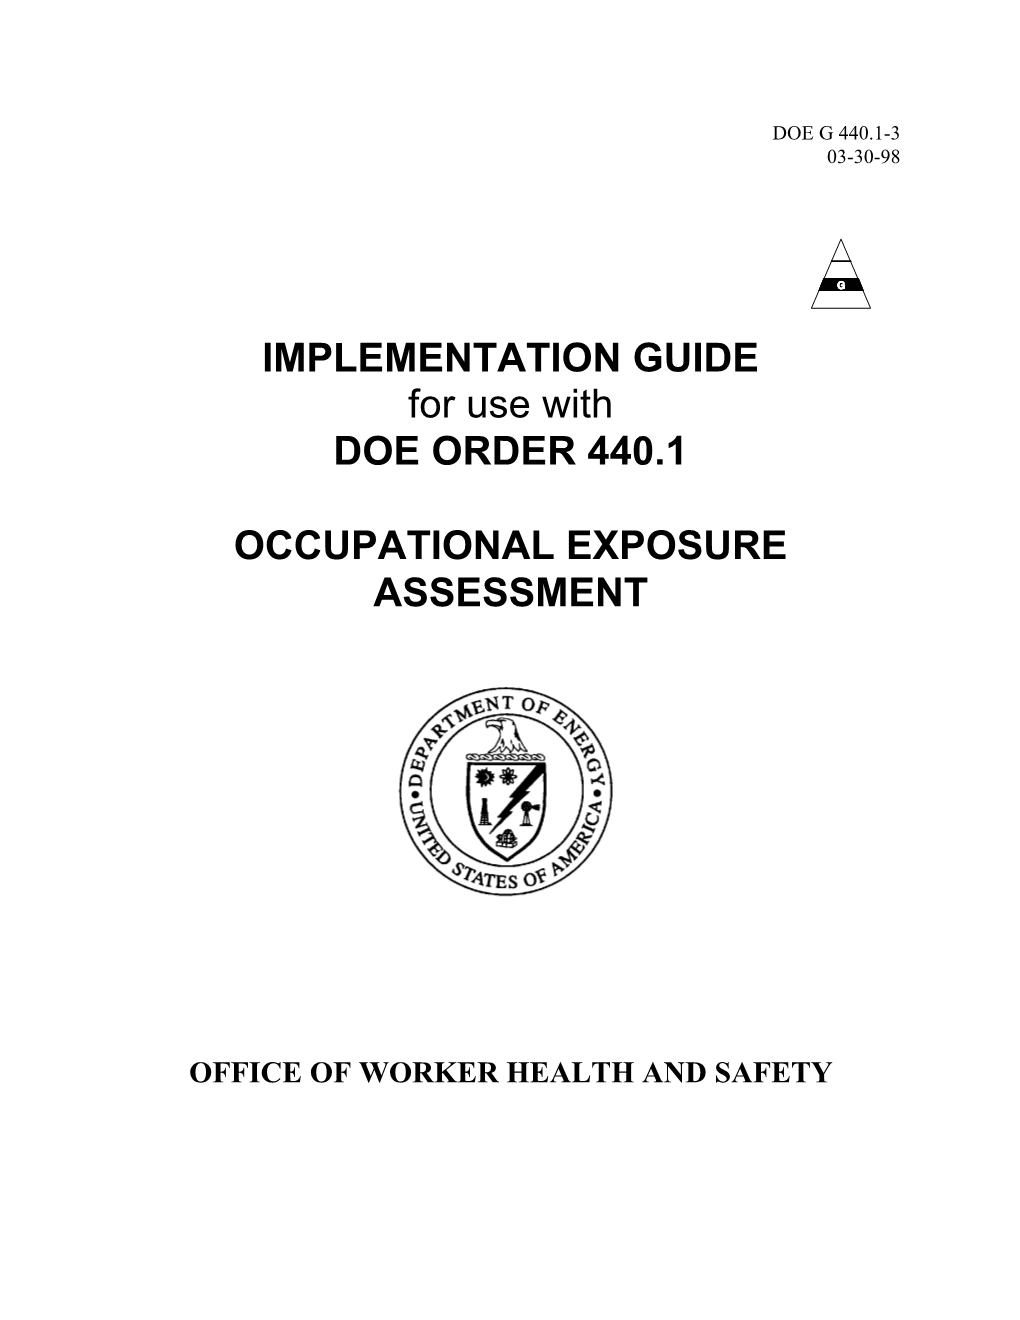 IMPLEMENTATION GUIDE for Use with DOE ORDER 440.1